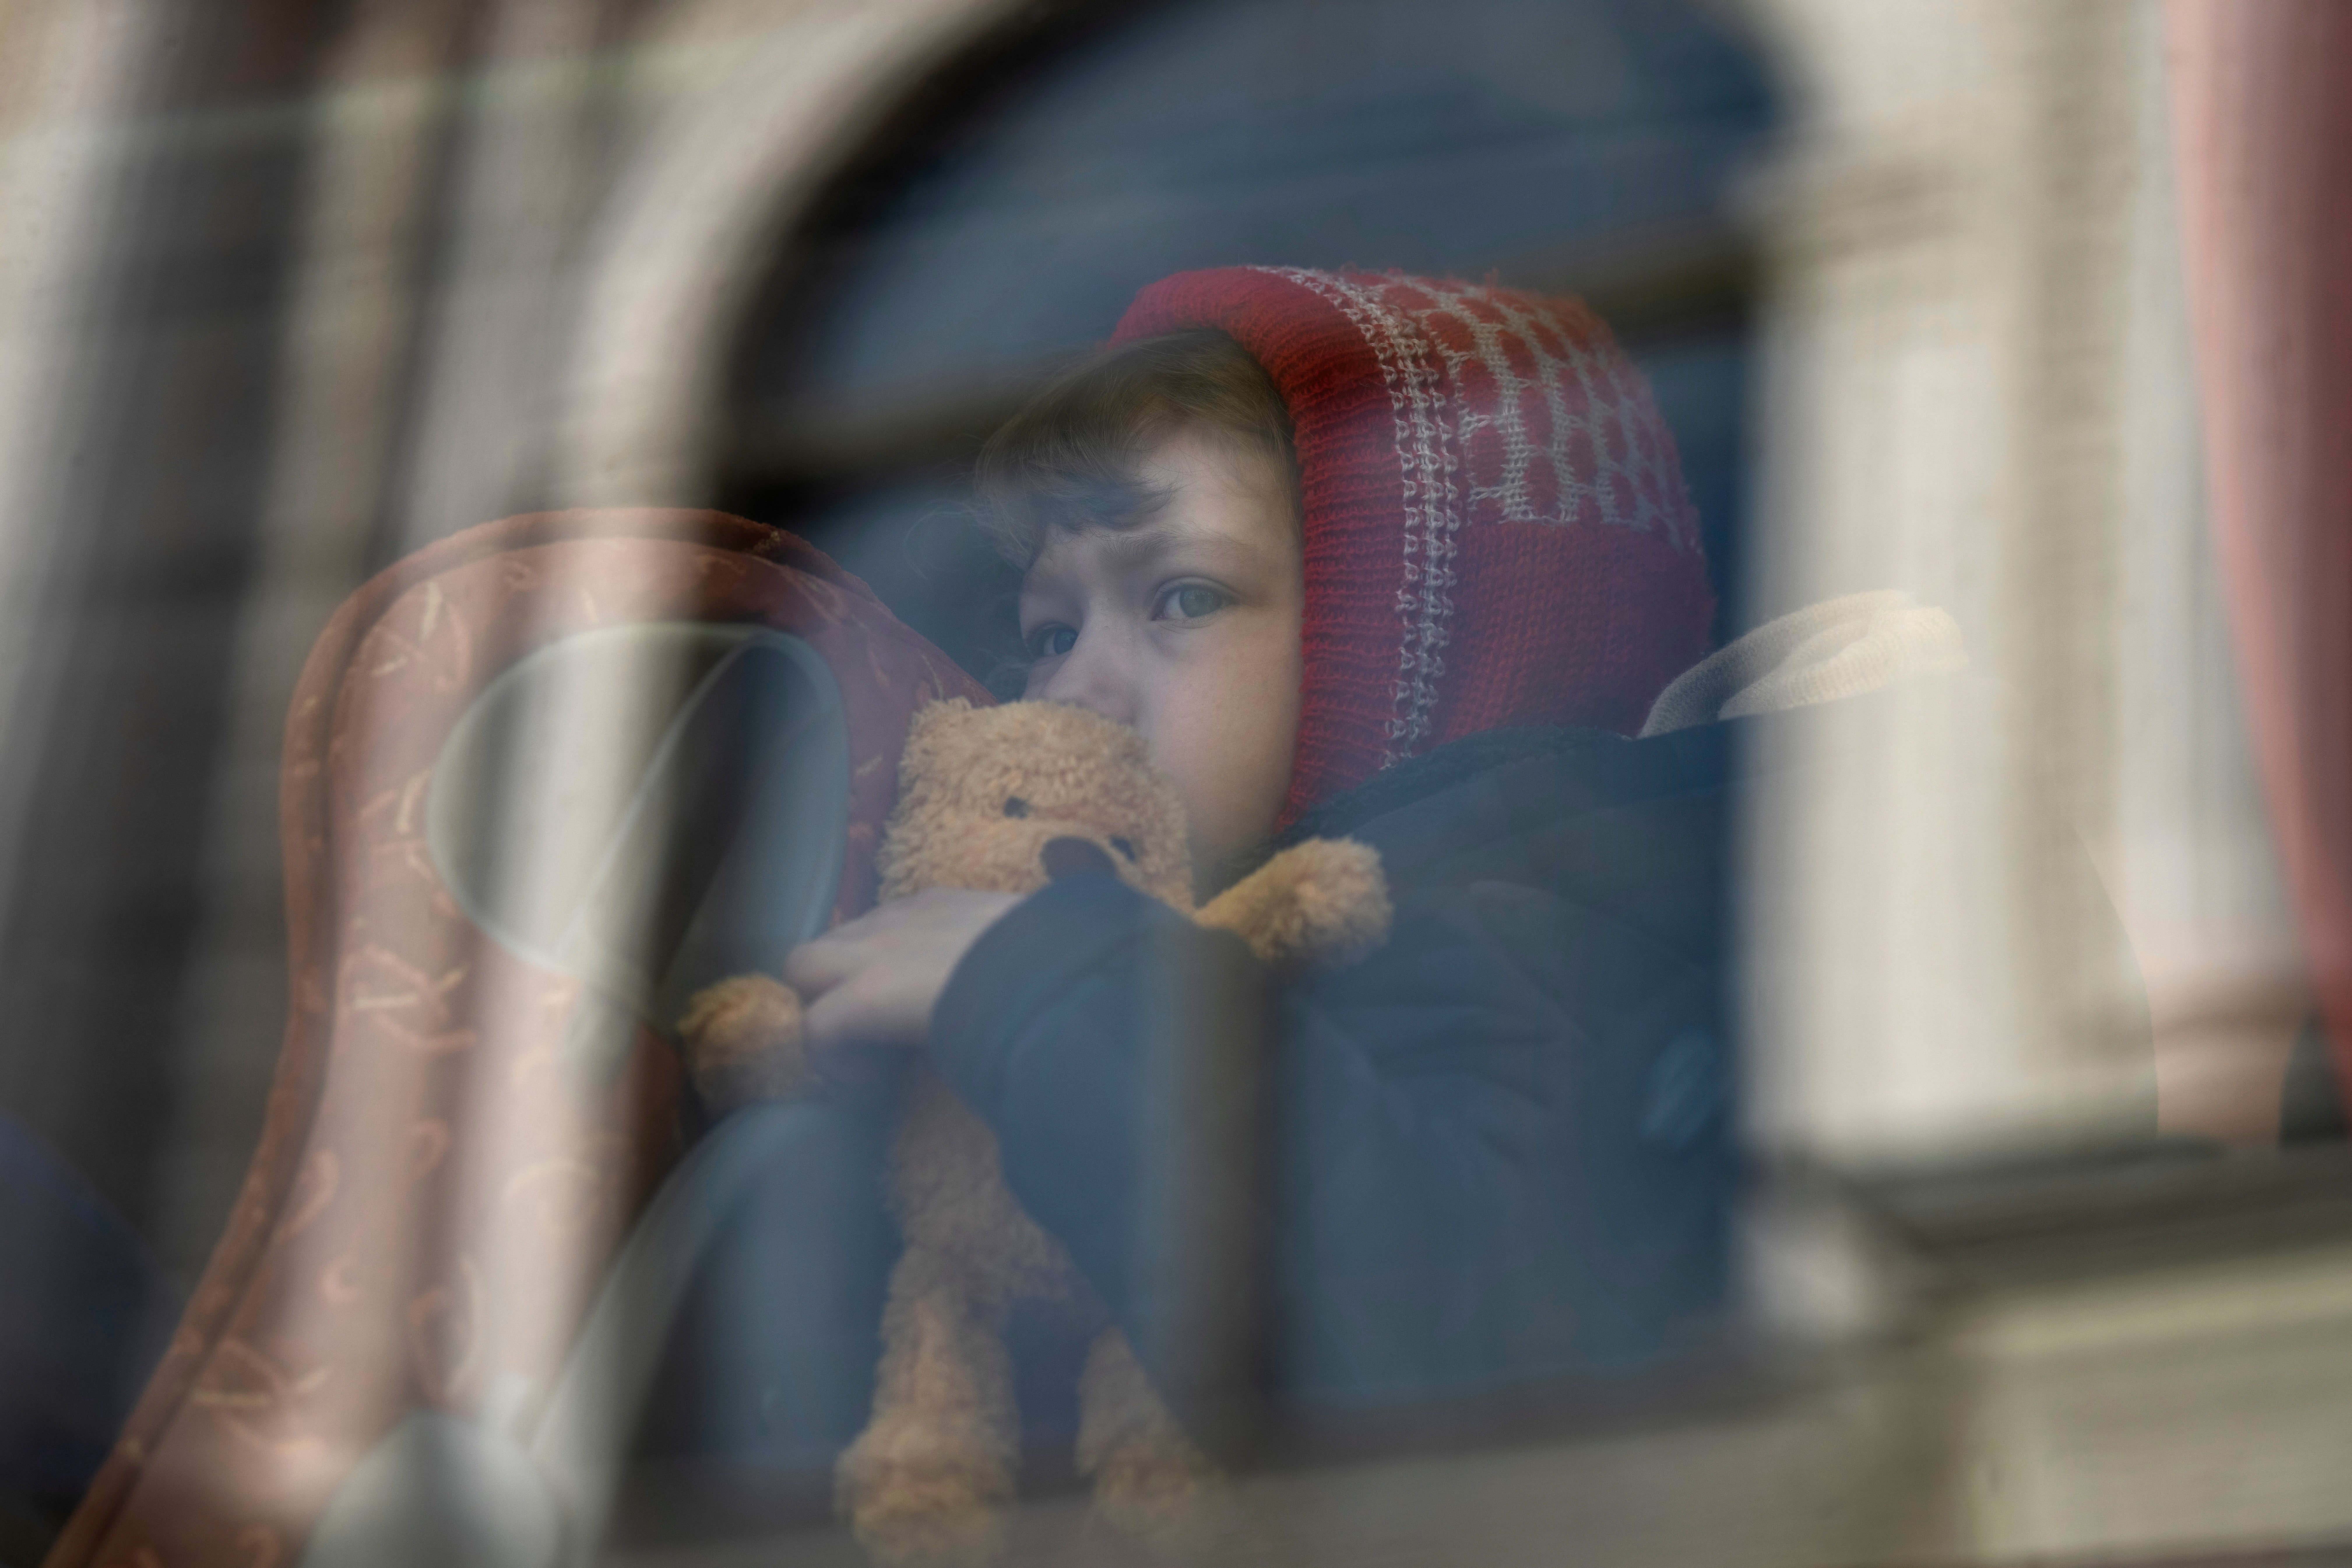 A child who fled the war in Ukraine waits in a bus after arriving in Poland (Petros Giannakouris/AP)